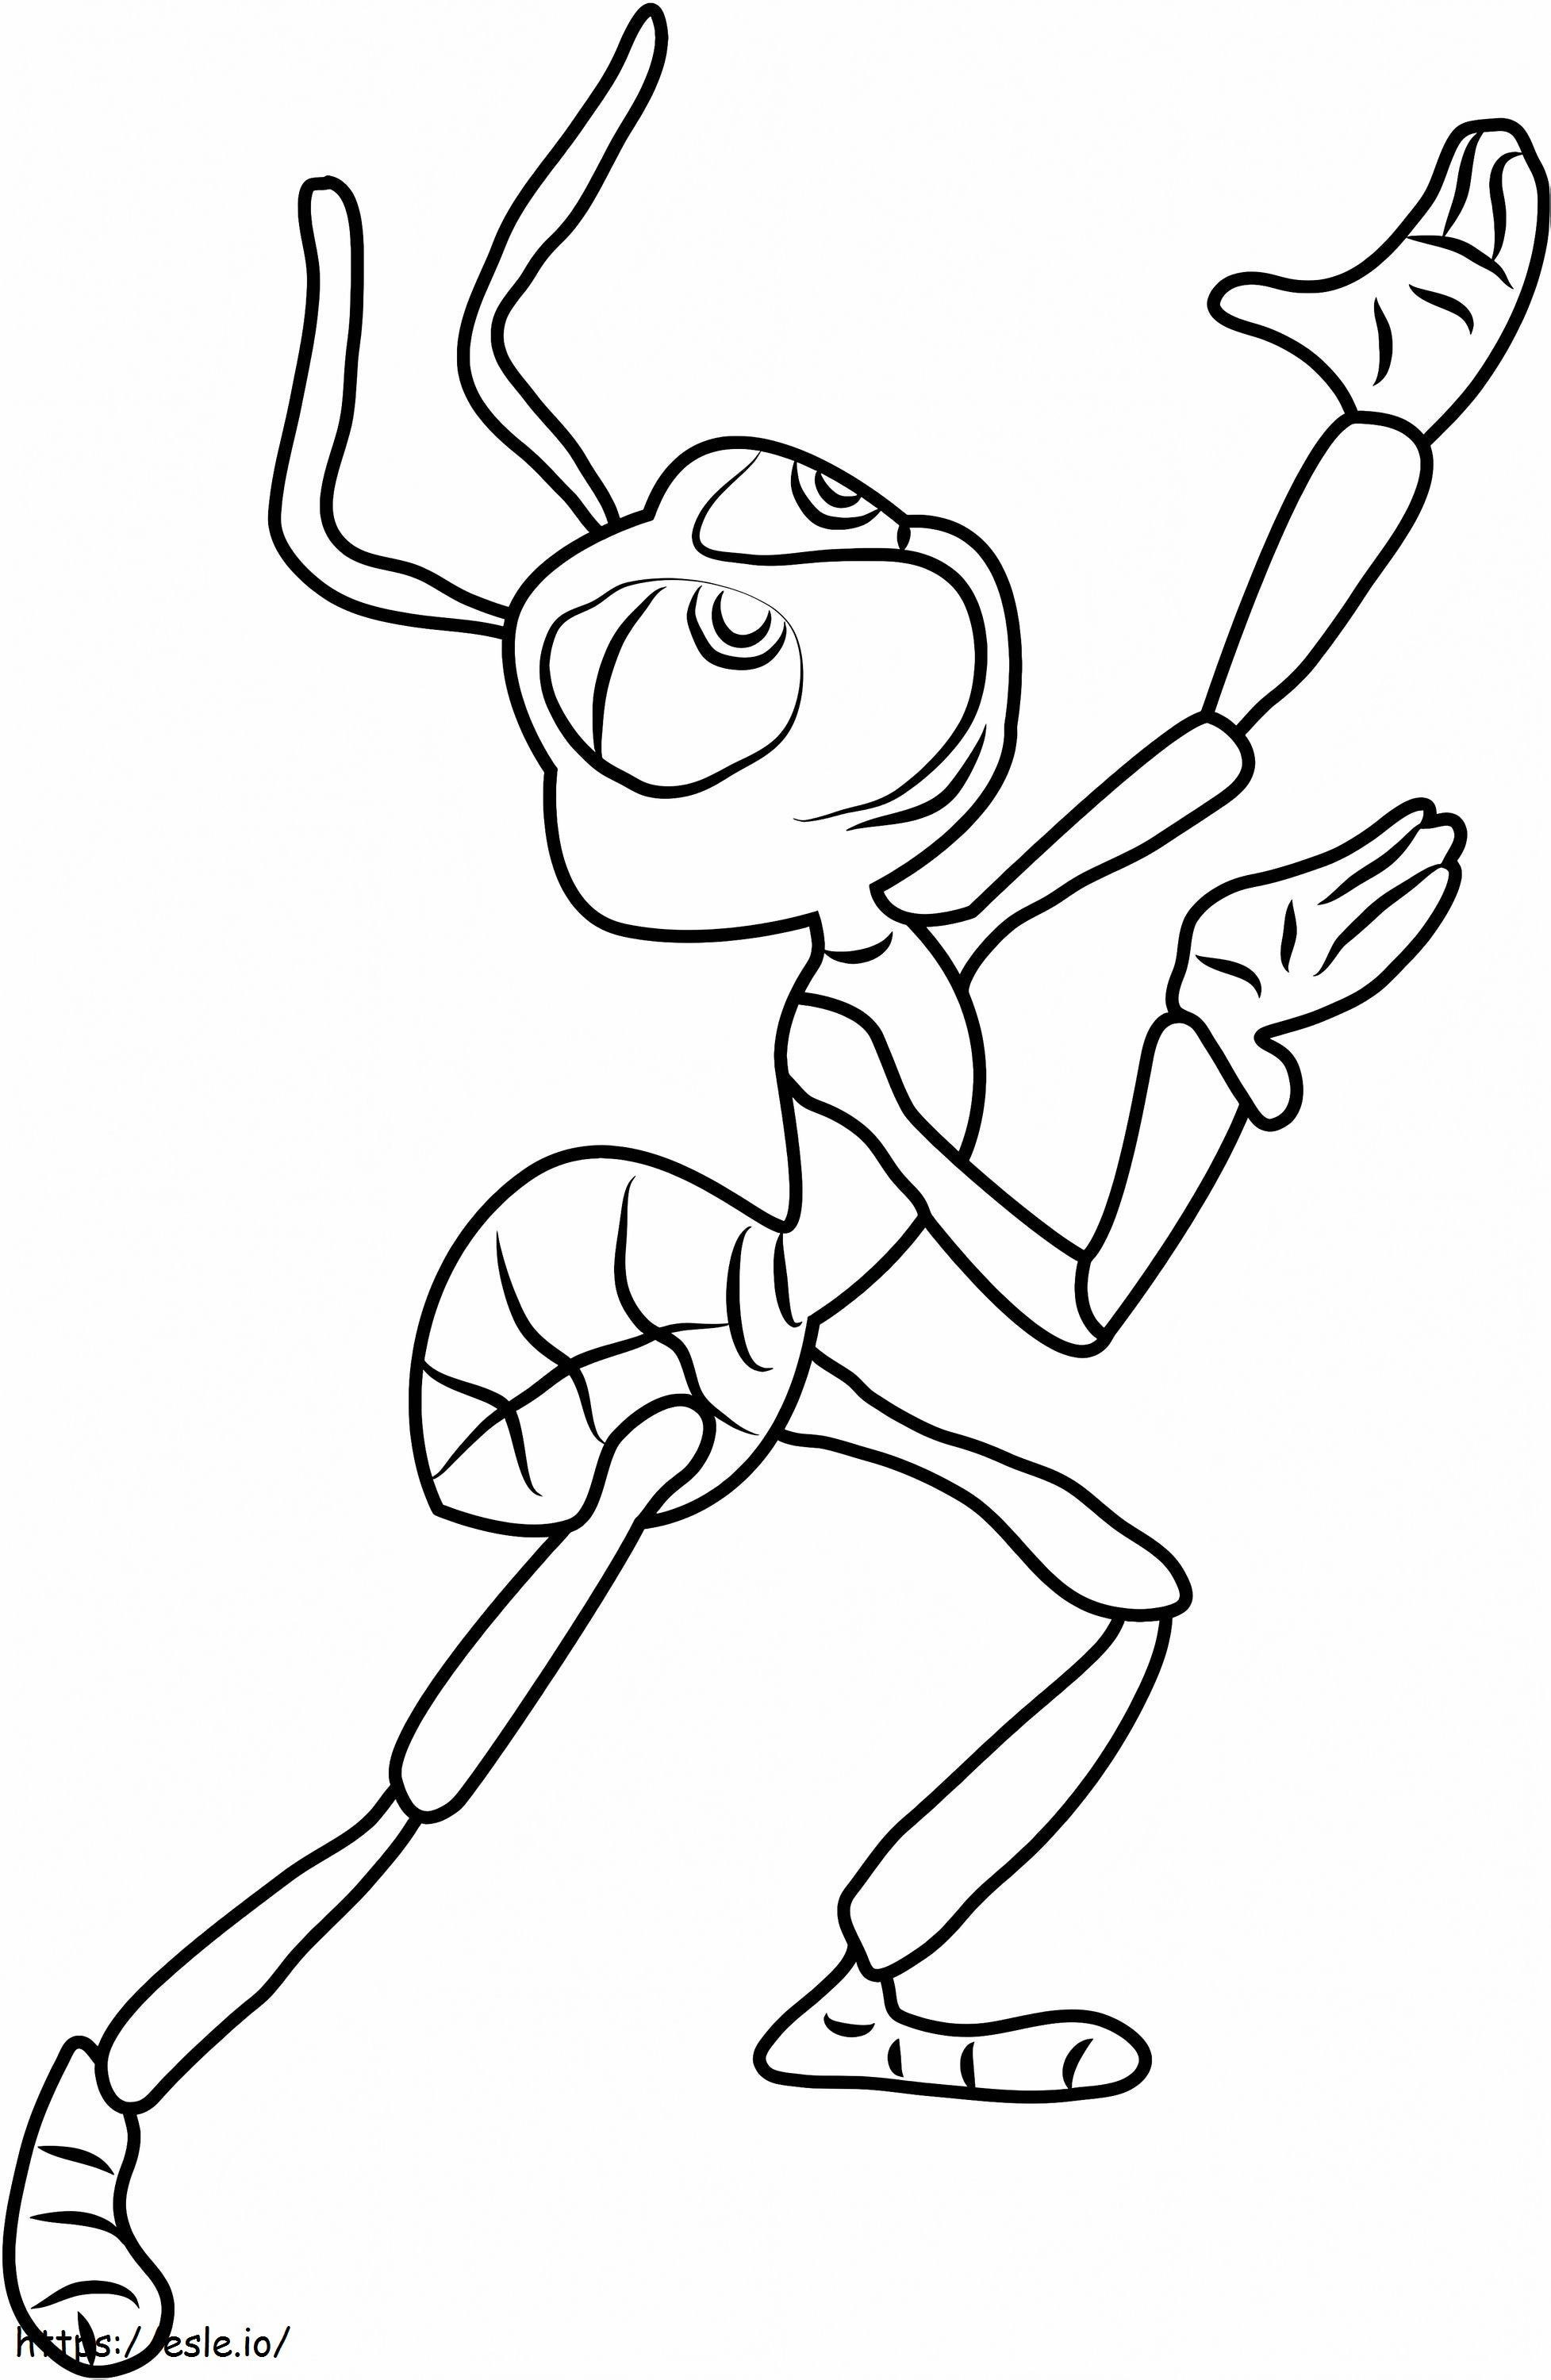 1532432477 Cop Dancing A4 coloring page